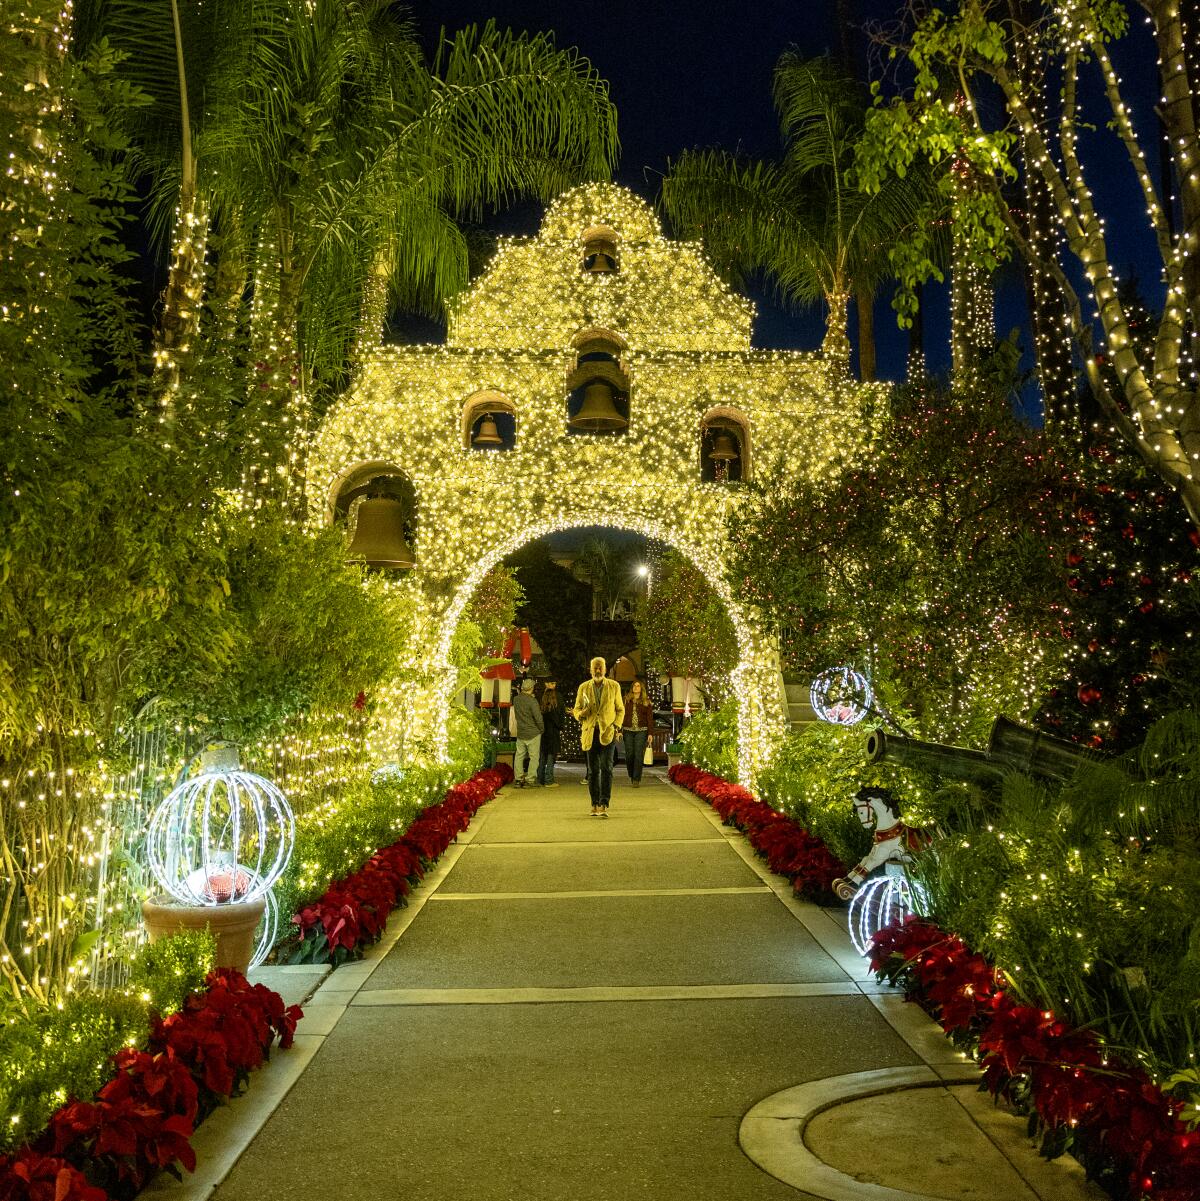 The entryway at a historic hotel shows off some of its extravagant holiday lights.